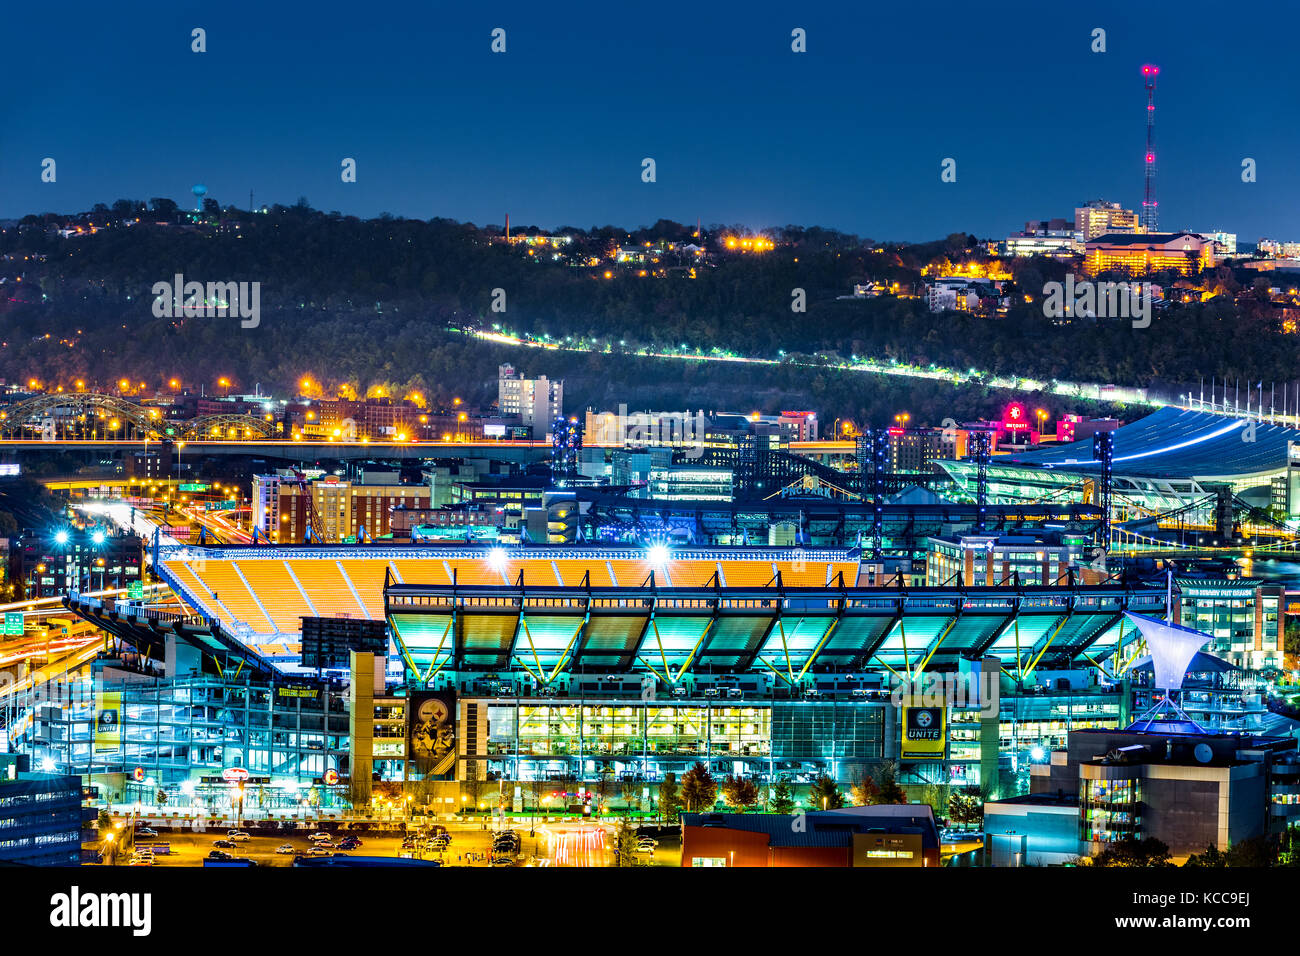 PITTSBURGH - NOVEMBER 10, 2016: Heinz Field stadium by night. Heinz Field stadium serves as the home to the Pittsburgh Steelers and Pittsburgh Panther Stock Photo